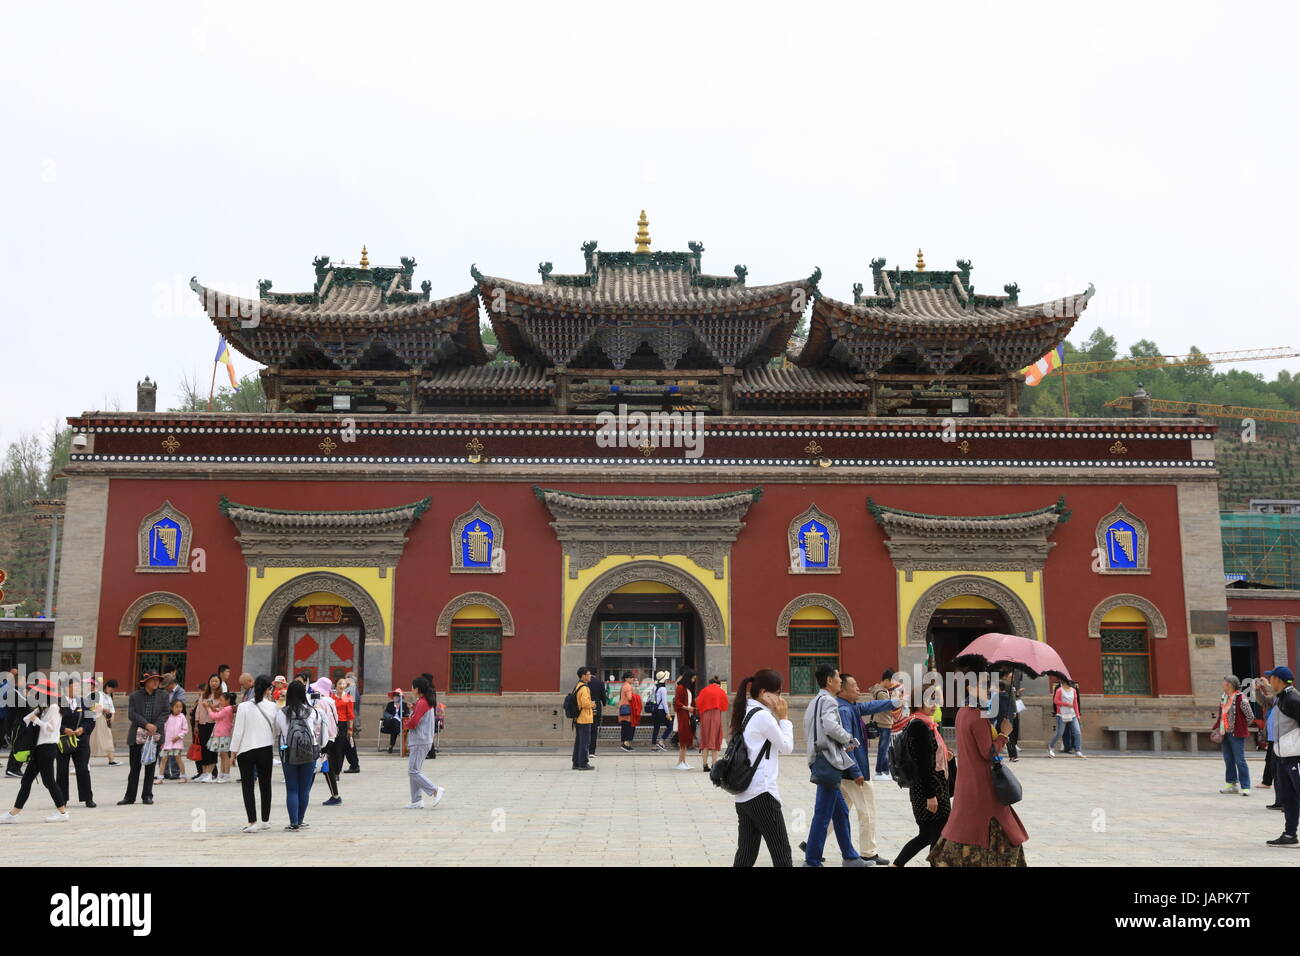 Xining, Xining, China. 7th June, 2017. Xining, CHINA-June 7 2017: (EDITORIAL USE ONLY. CHINA OUT) .The Tar Monastery, one of the six most important monasteries of the Gelukpa (Yellow Hat) school of Tibetan Buddhism, is a large complex featuring dozens of halls and towers on a mountainside in both Tibetan and Han architectural styles. Located in Huangzhong County, 25 kilometers from Xining, northwest China's Qinghai Province, the monastery was built in 1560 in honor of the founder of Gelukpa School, Tsongkhapa. It's known for its many butter sculptures, mural paintings and barbolas which fully Stock Photo